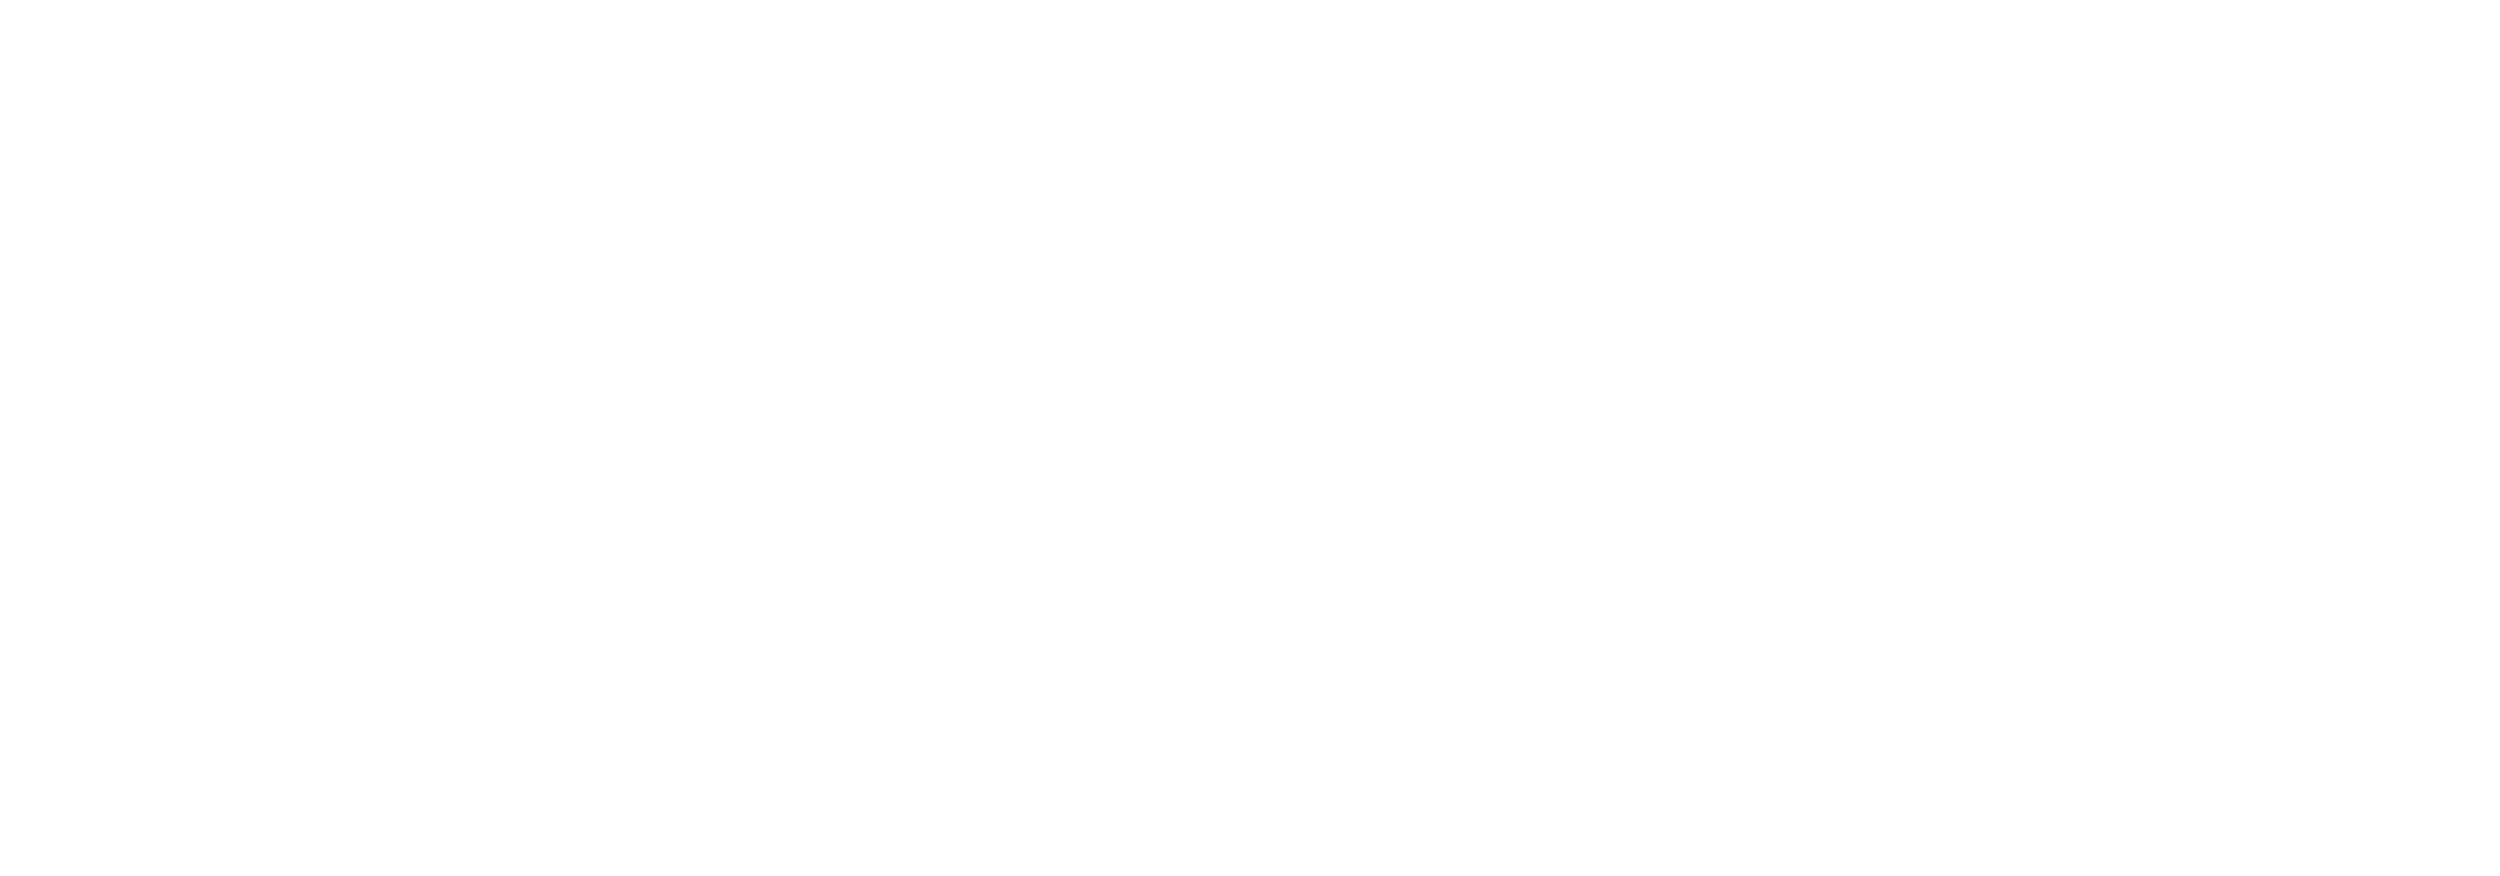 Rutgers_University_with_the_state_university_logo.svg.png